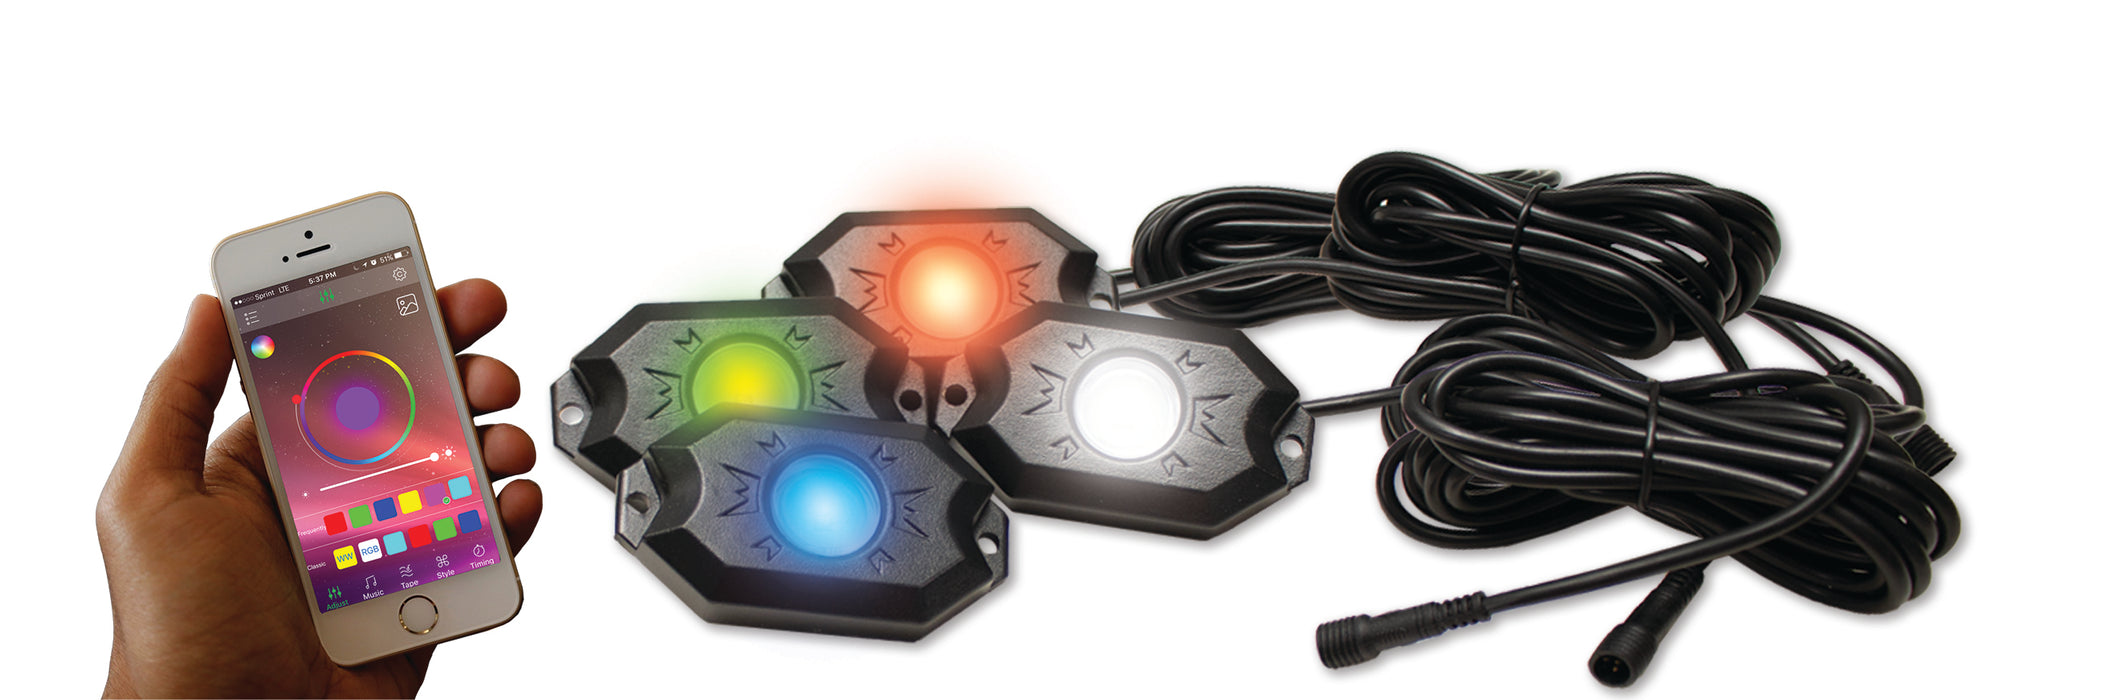 4-POD RGBW Hi-Power Rock Light Complete Kit with Bluetooth APP controls in Retail Box